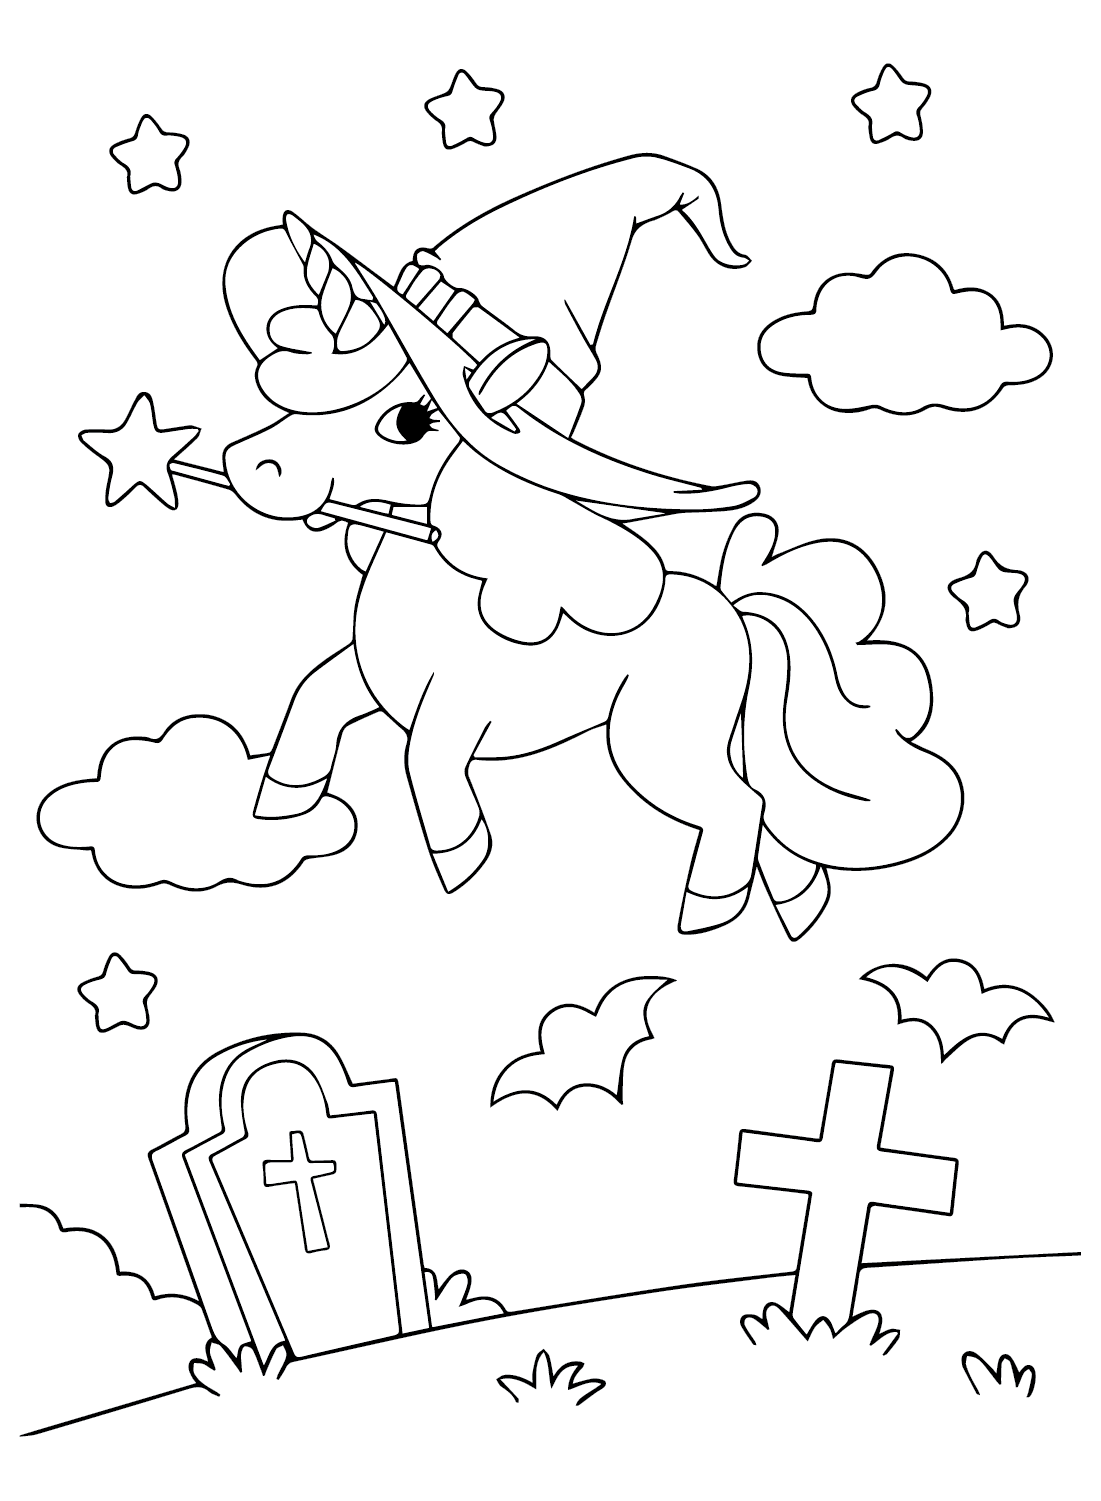 Unicorn Halloween Coloring Sheet - Halloween Unicorn Coloring Pages ...